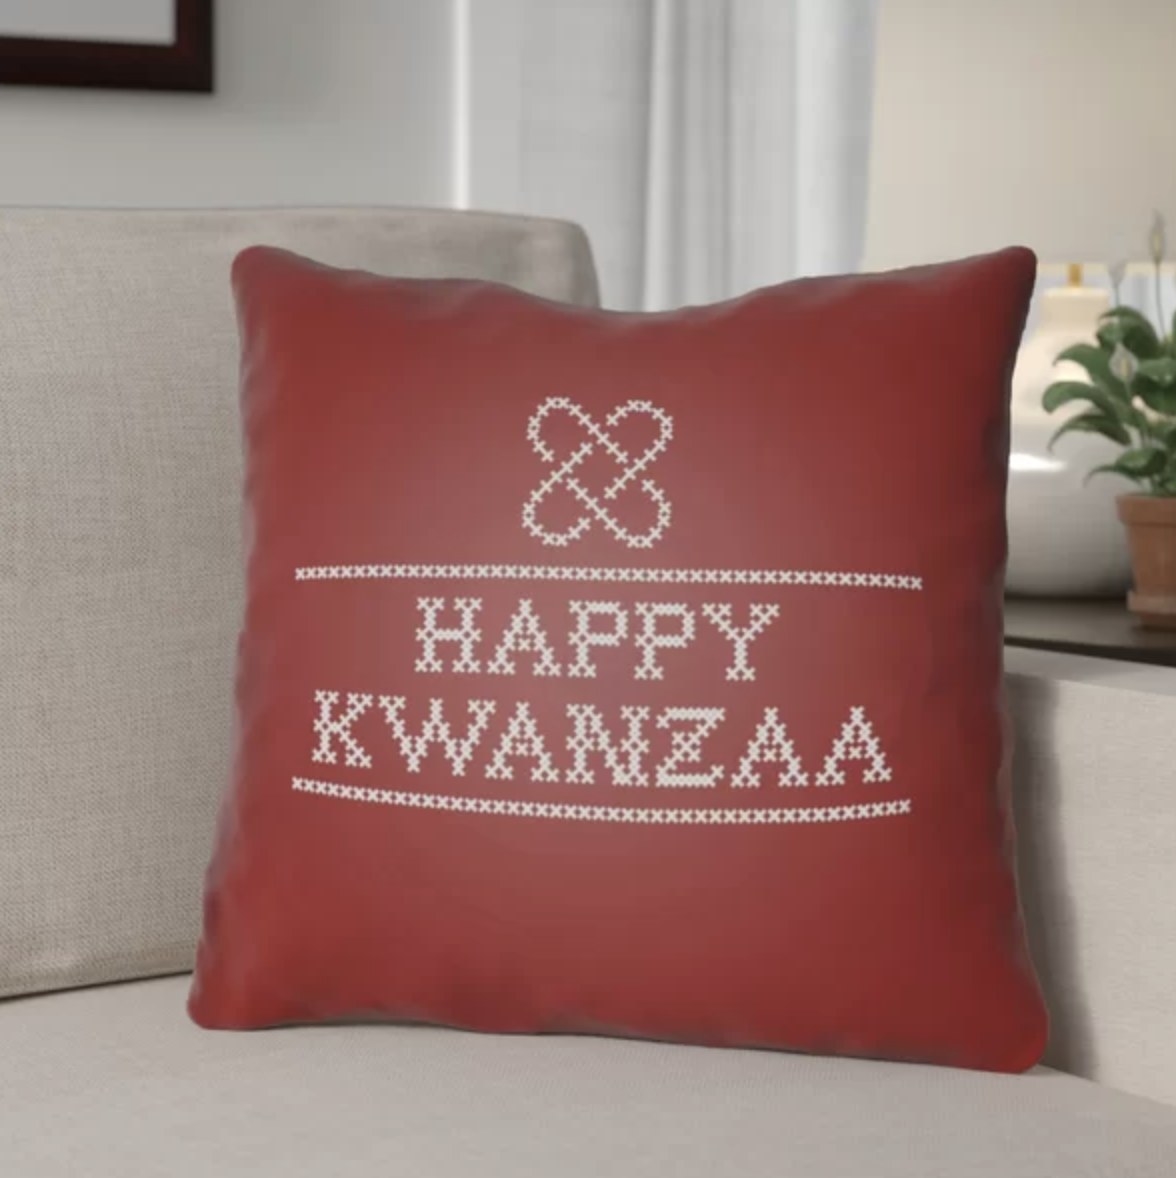 The red pillow says &quot;HAPPY KWANZAA&quot; in a sweater-like print